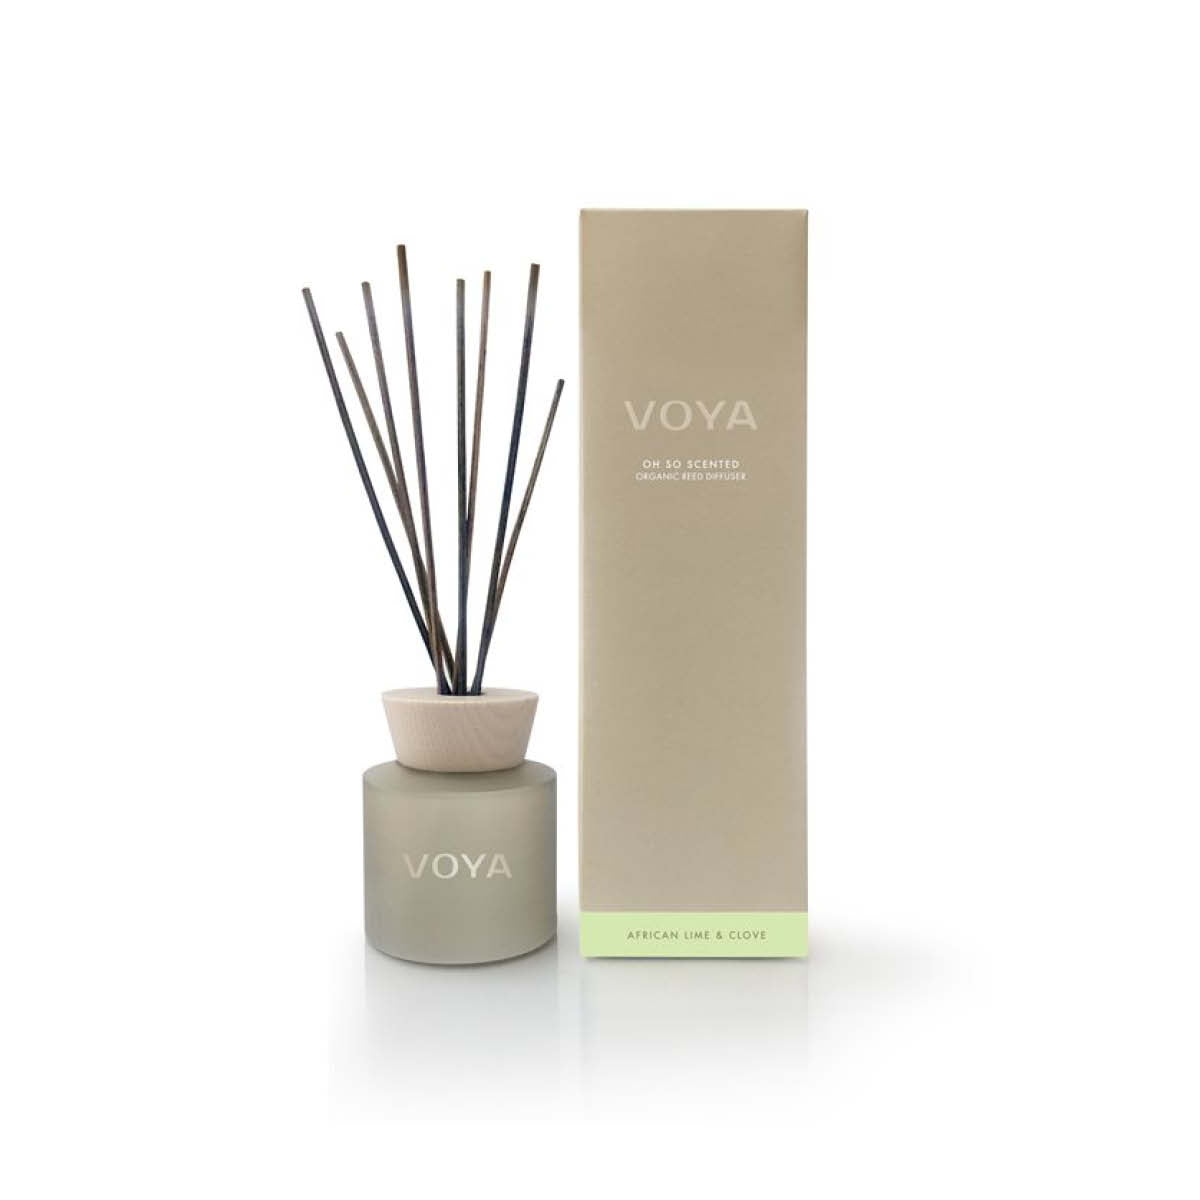 VOYA Oh So Scented Reed Diffuser - African Lime & Clove